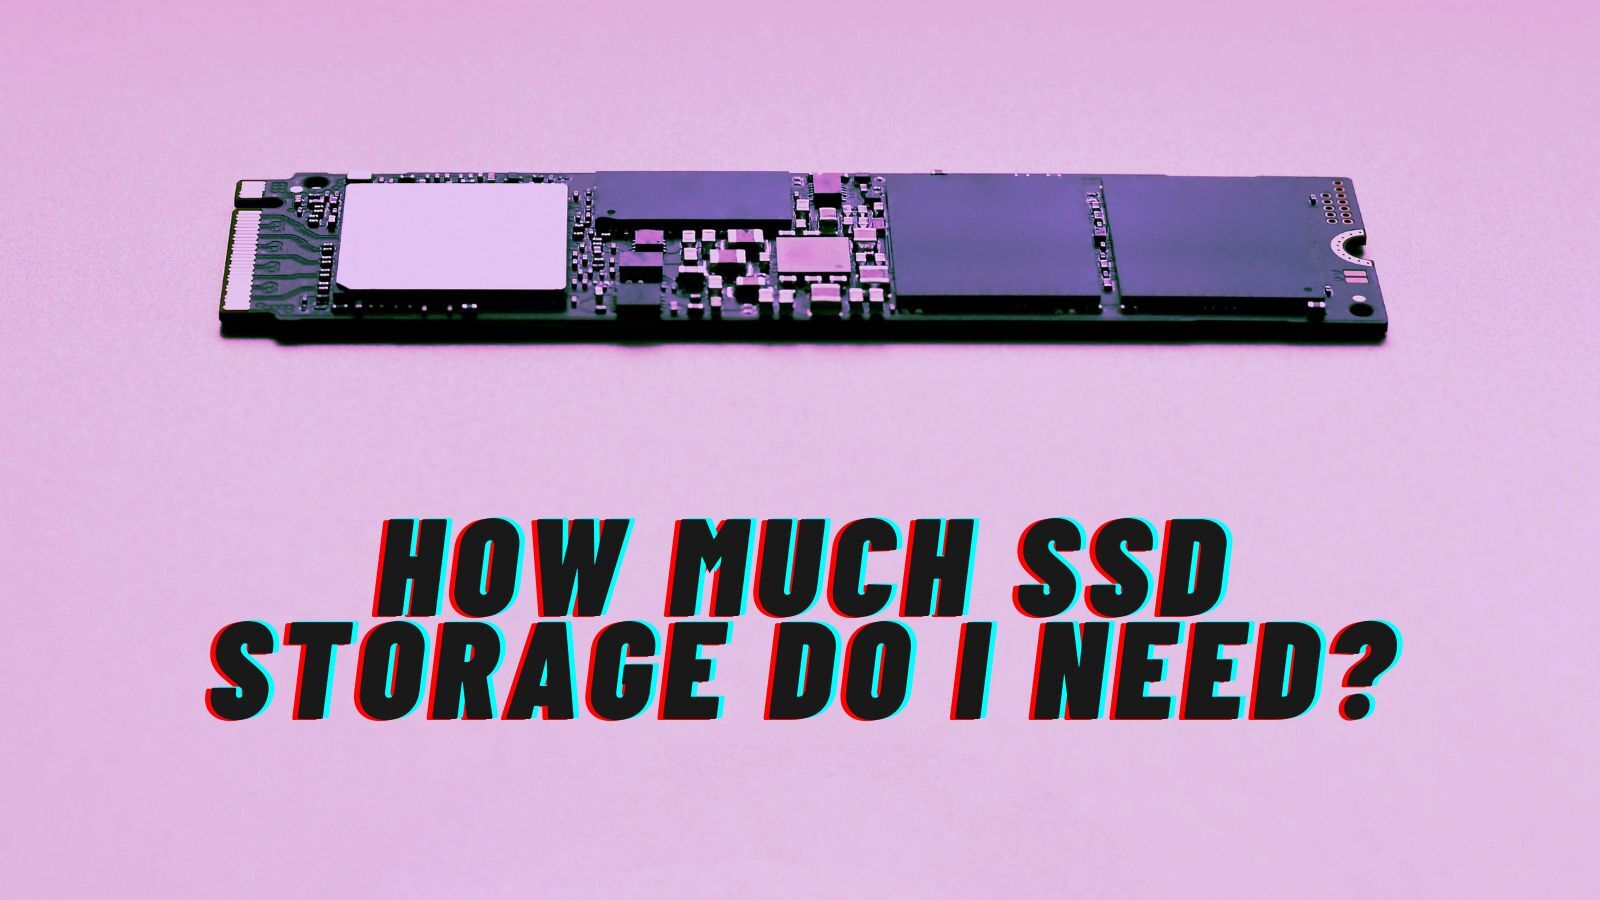 How Much SSD Storage Do I Need: 4 Things to Consider